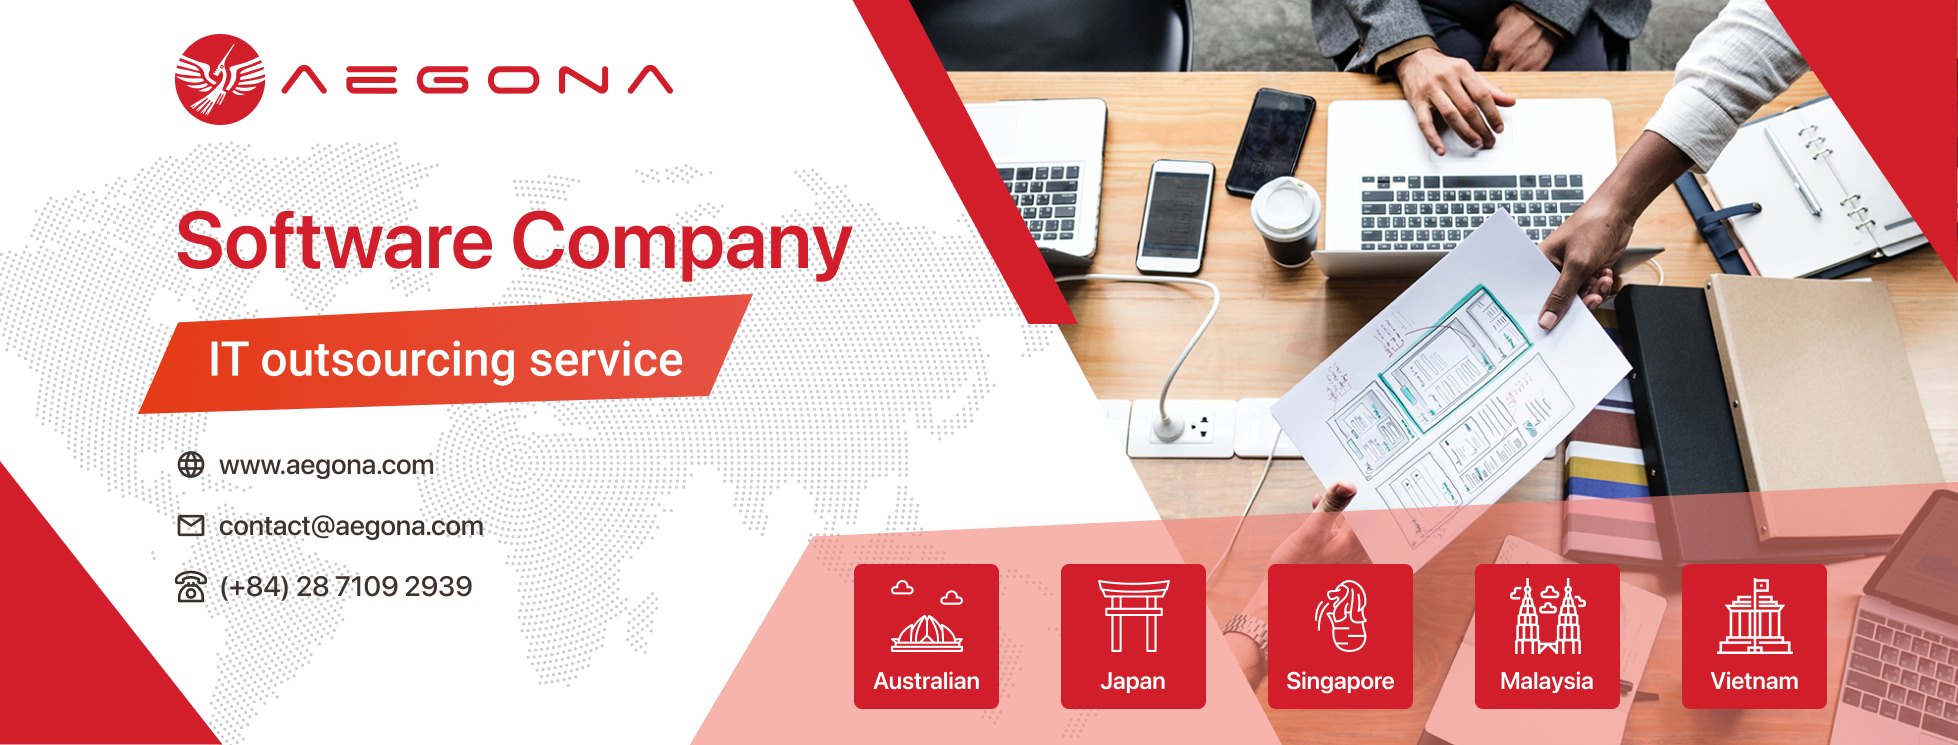 Aegona tuyển dụng Business Development/Business Consultant 